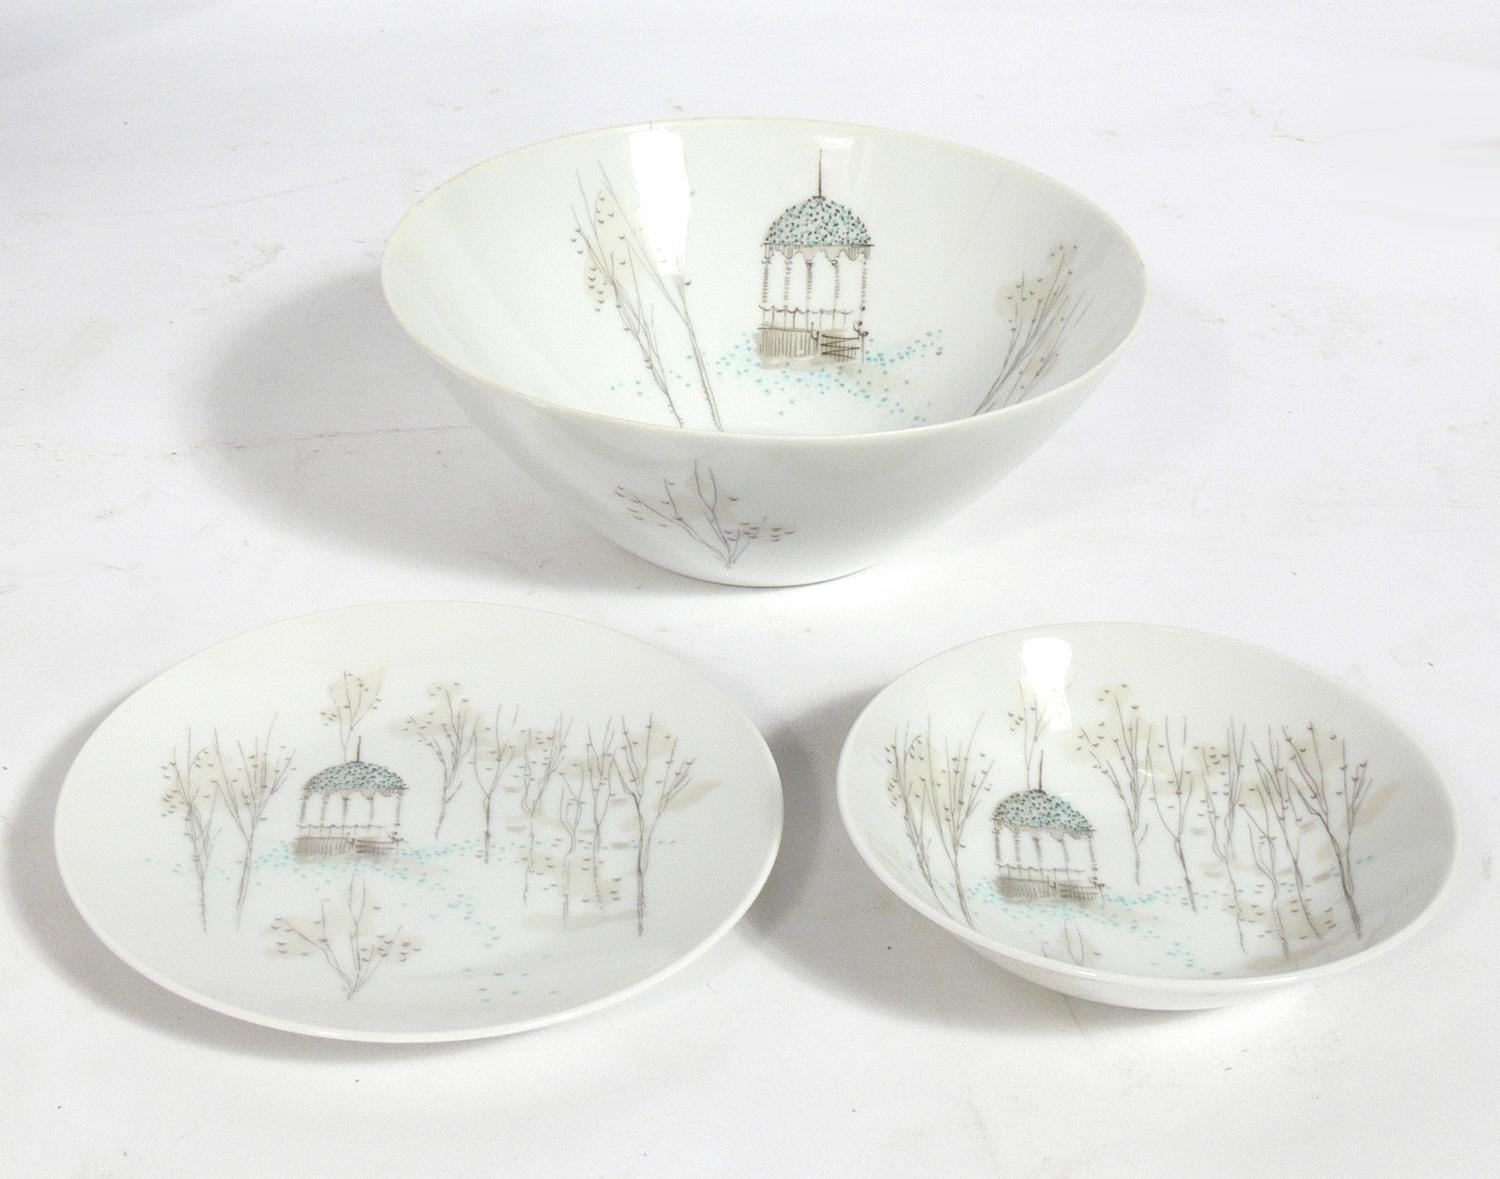 Midcentury China or dinnerware set, in the 